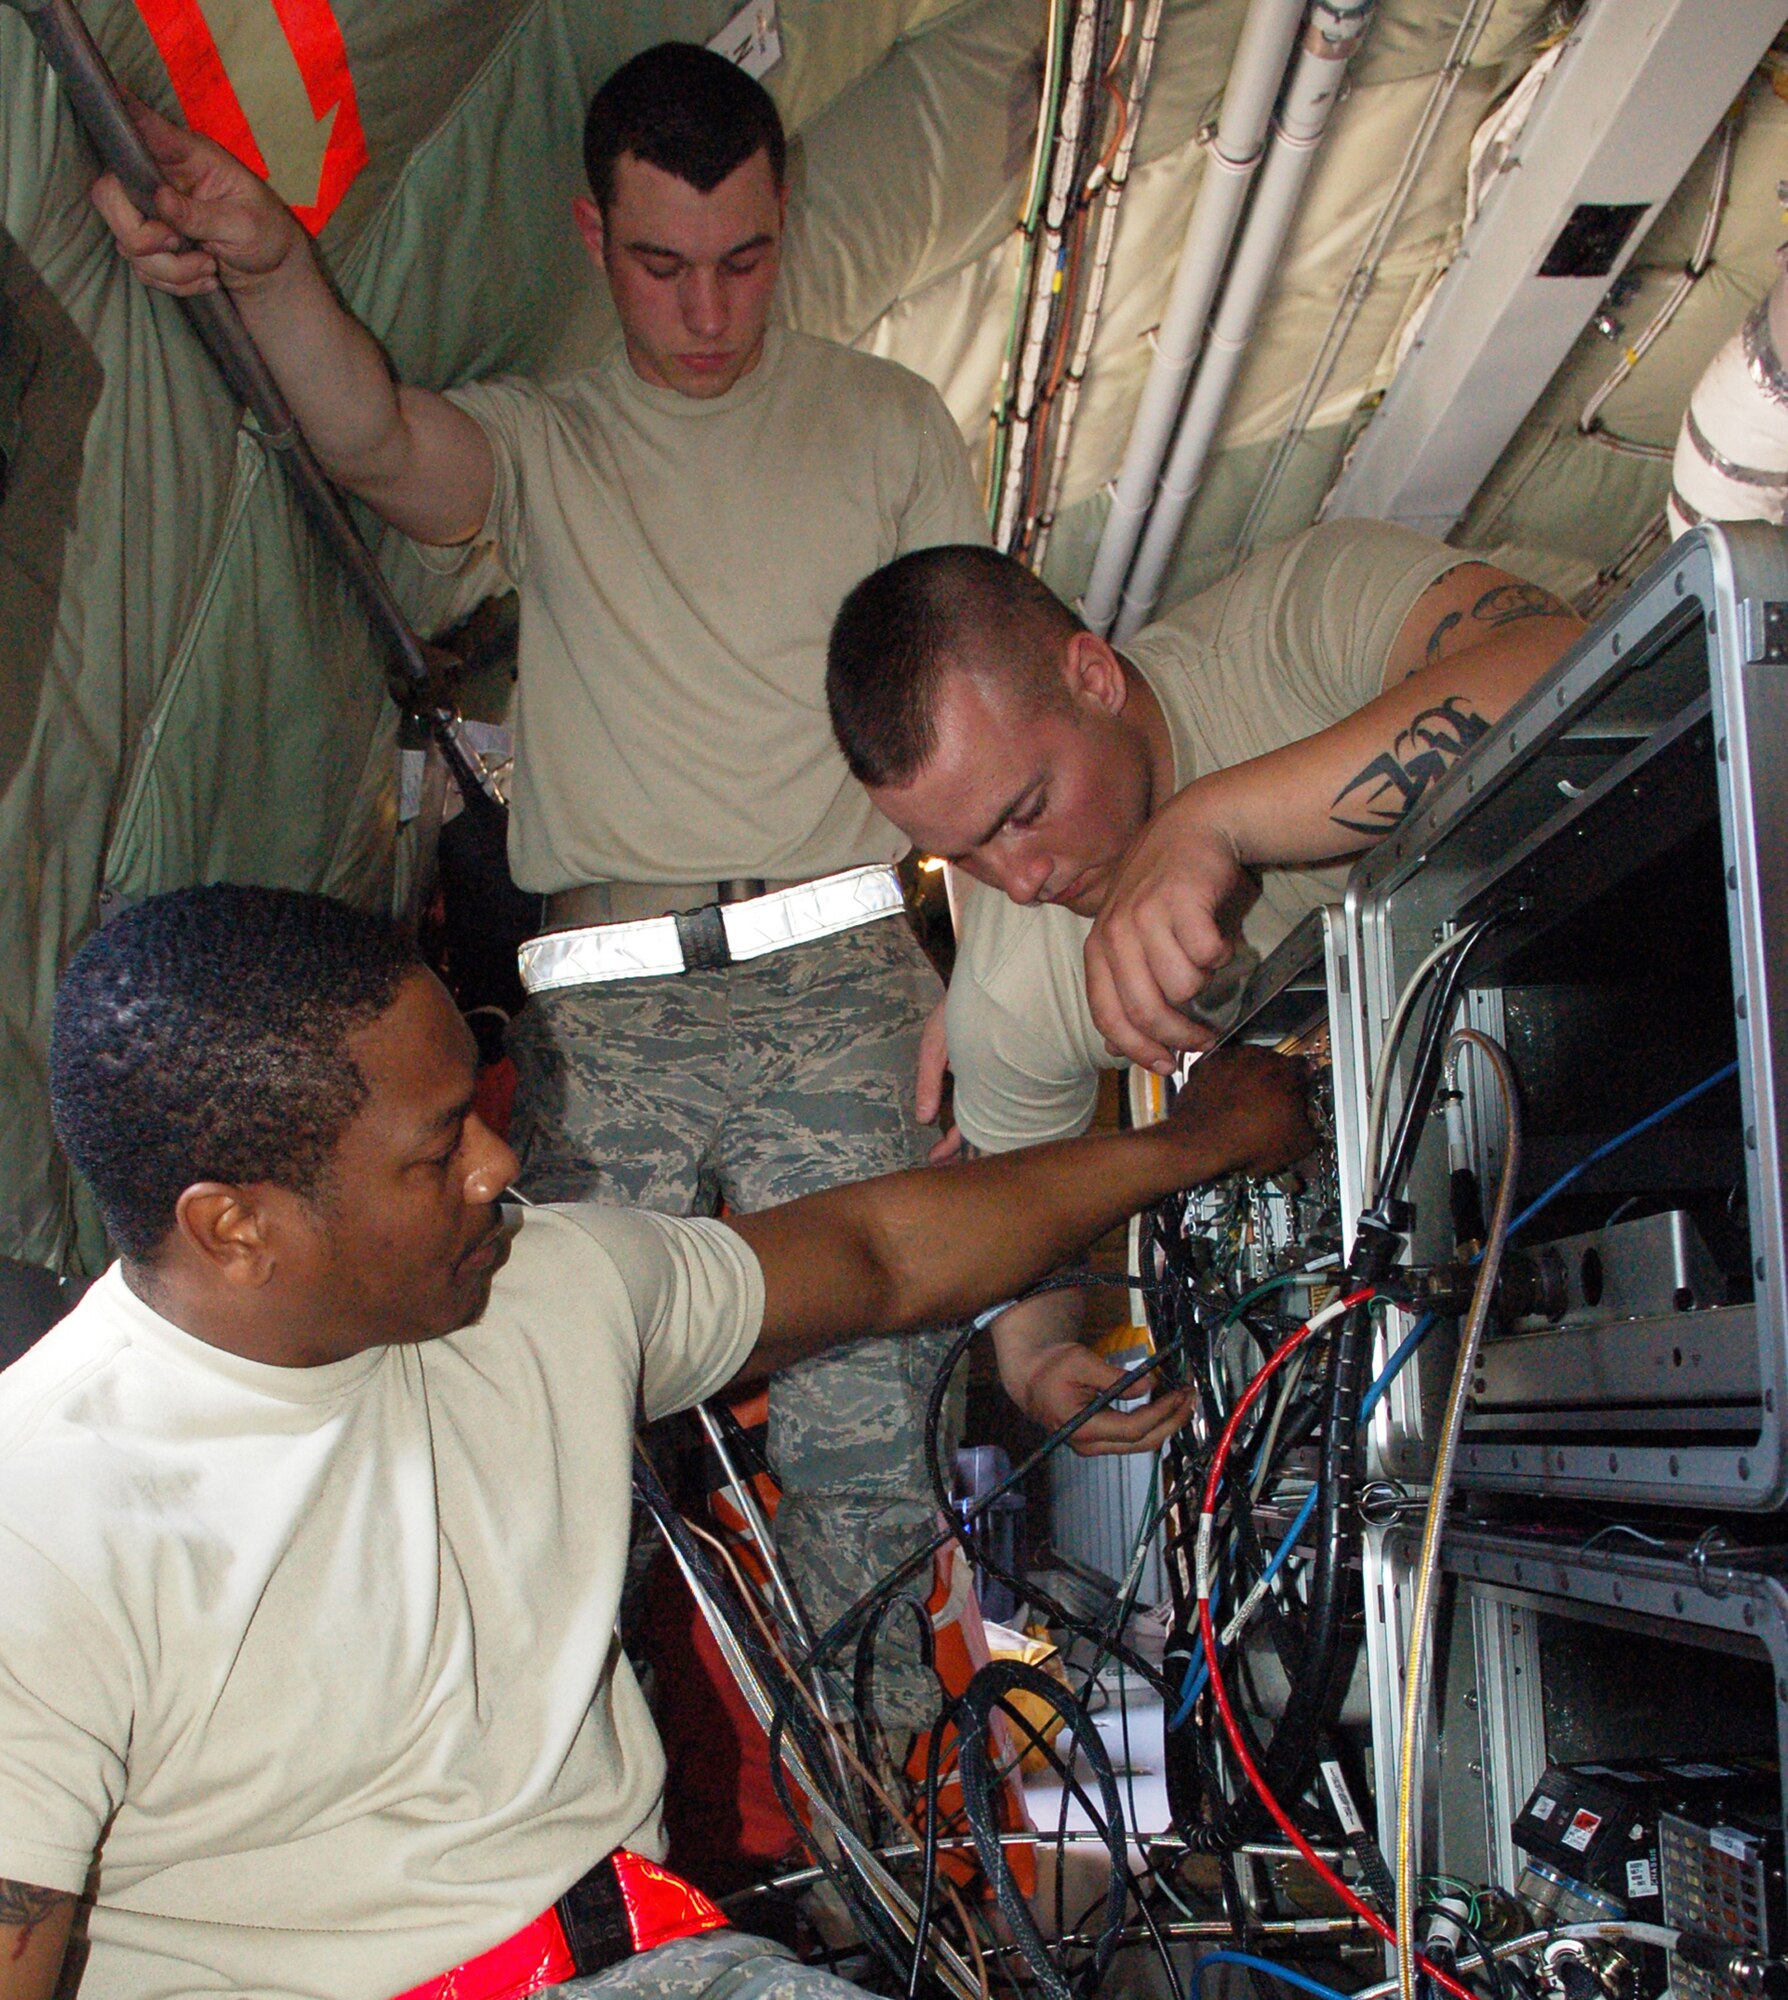 Airman 1st Class Joseph Robinson (front), Senior Airman William Allen (right) and Airman 1st Class Michael Burton help hook up the Roll-On-Beyond-Line-Of-Sight Enhancement System "B-kit" inside a KC-135 Stratotanker prior to a March 12 mission at Manas Air Base, Kyrgyzstan. Airman Robinson and Burton are both deployed from the 92nd Aircraft Maintenance Squadron at Fairchild Air Force Base, Wash. Airman Robinson is a native of McCoy, Miss., and Airman Burton is from New York City. Airman Allen is deployed from the 22nd Aircraft Maintenance Squadron at McConnell AFB, Kan., and is a native of Nunn, Colo. (U.S. Air Force photo/Maj. Damien Pickart) 